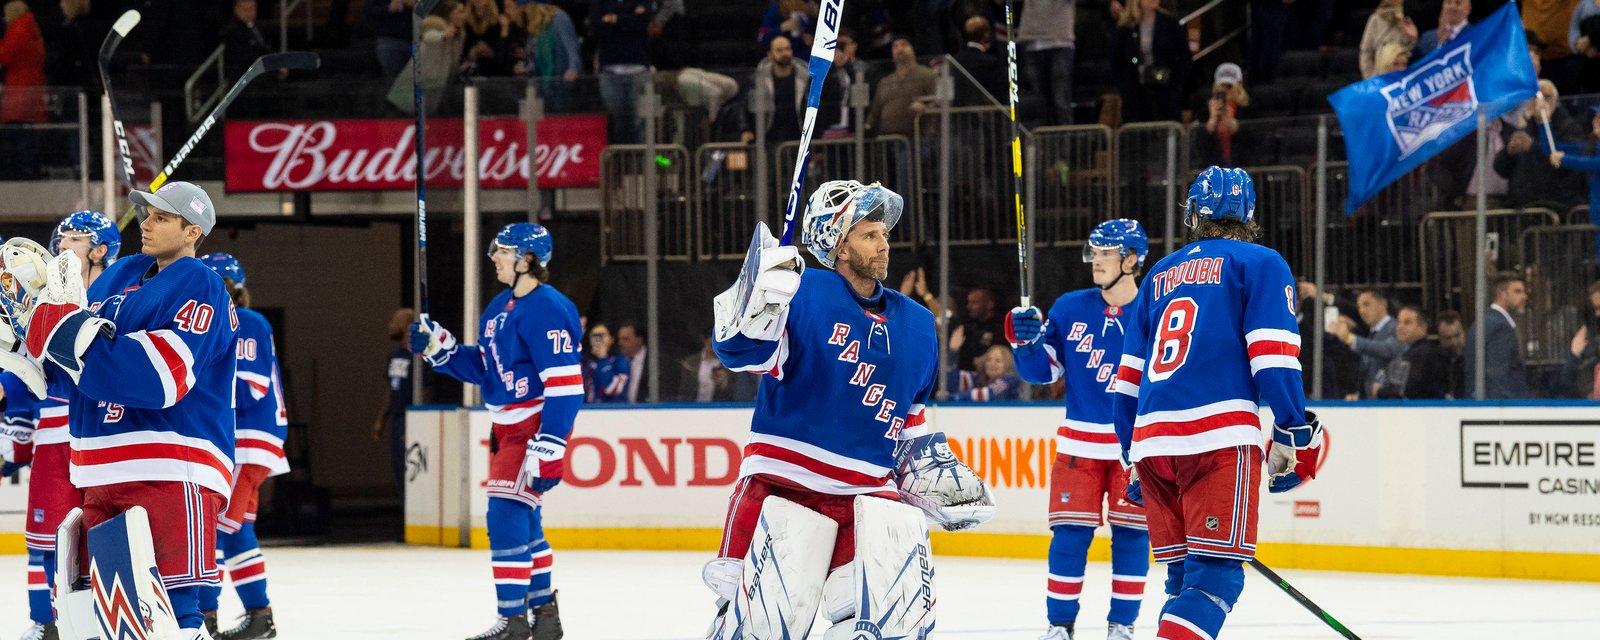 With a win against the Sens, Lundqvist would move up the all-time wins list